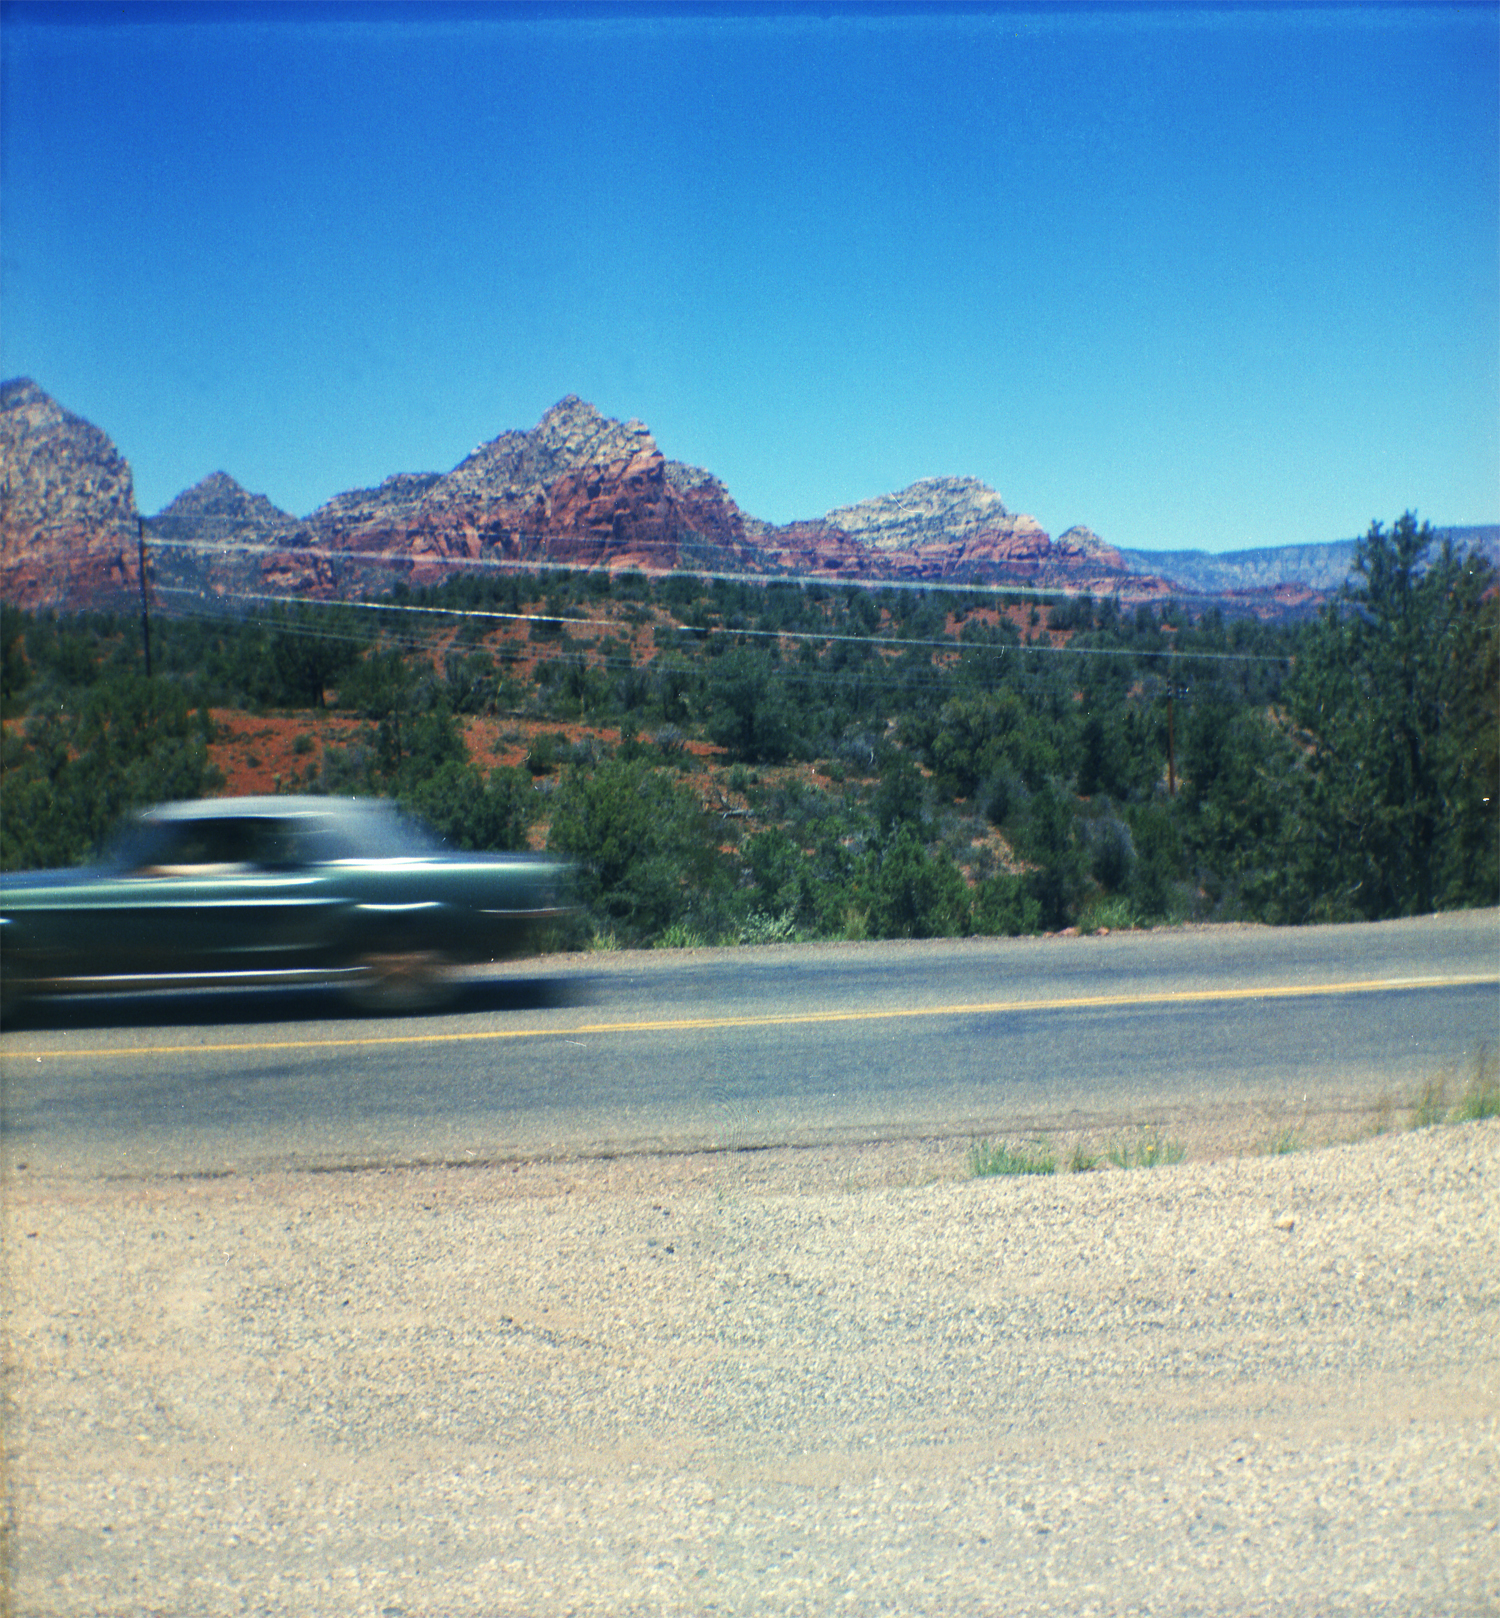 My father and his sister traveled to Illinois from California with my great grandparents for my grandpa's wedding. This was taken on the trip back to Los Angeles through Zion National Park. My dad wishes the camera, a Kodak Brownie, could have caught the car in focus but I think it's cool like it is. View full size.